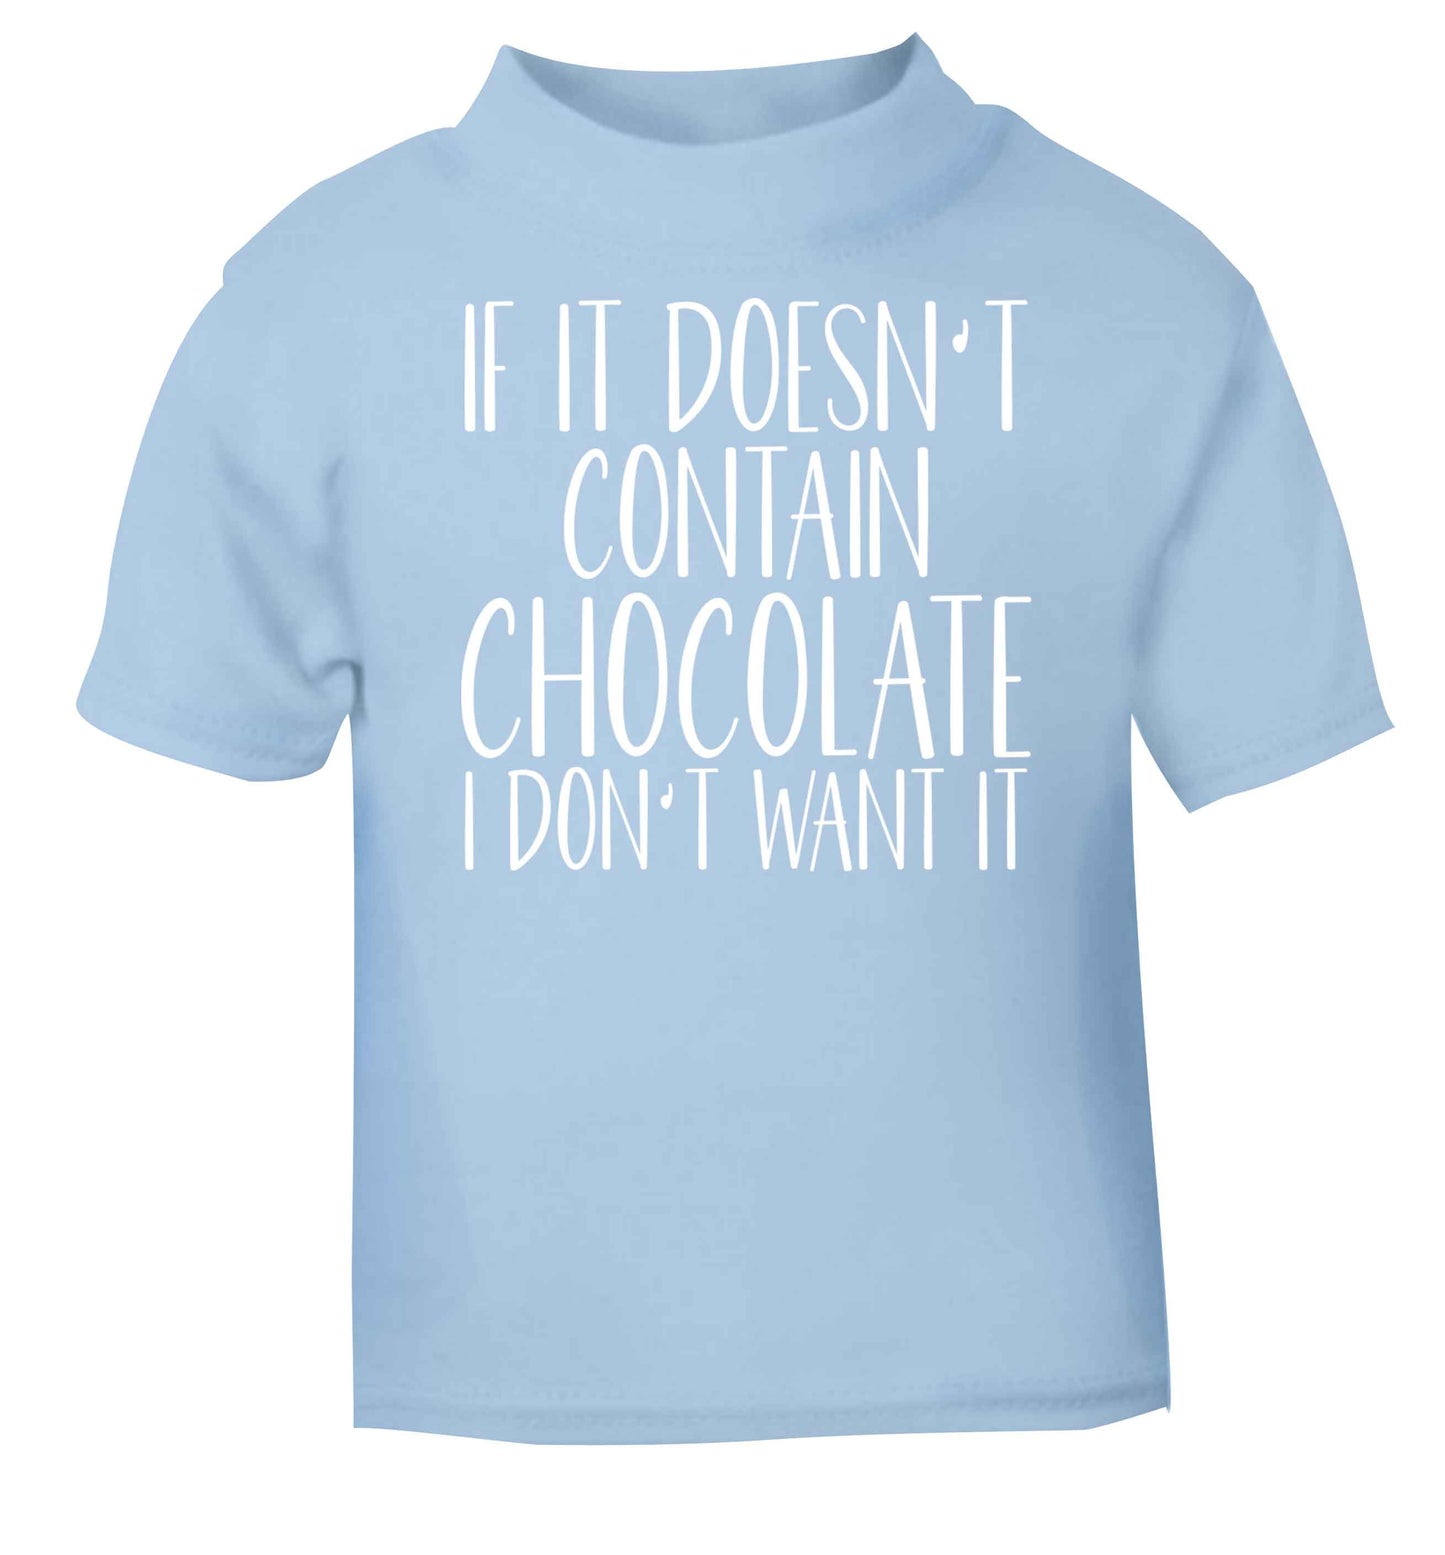 If it doesn't contain chocolate I don't want it light blue baby toddler Tshirt 2 Years